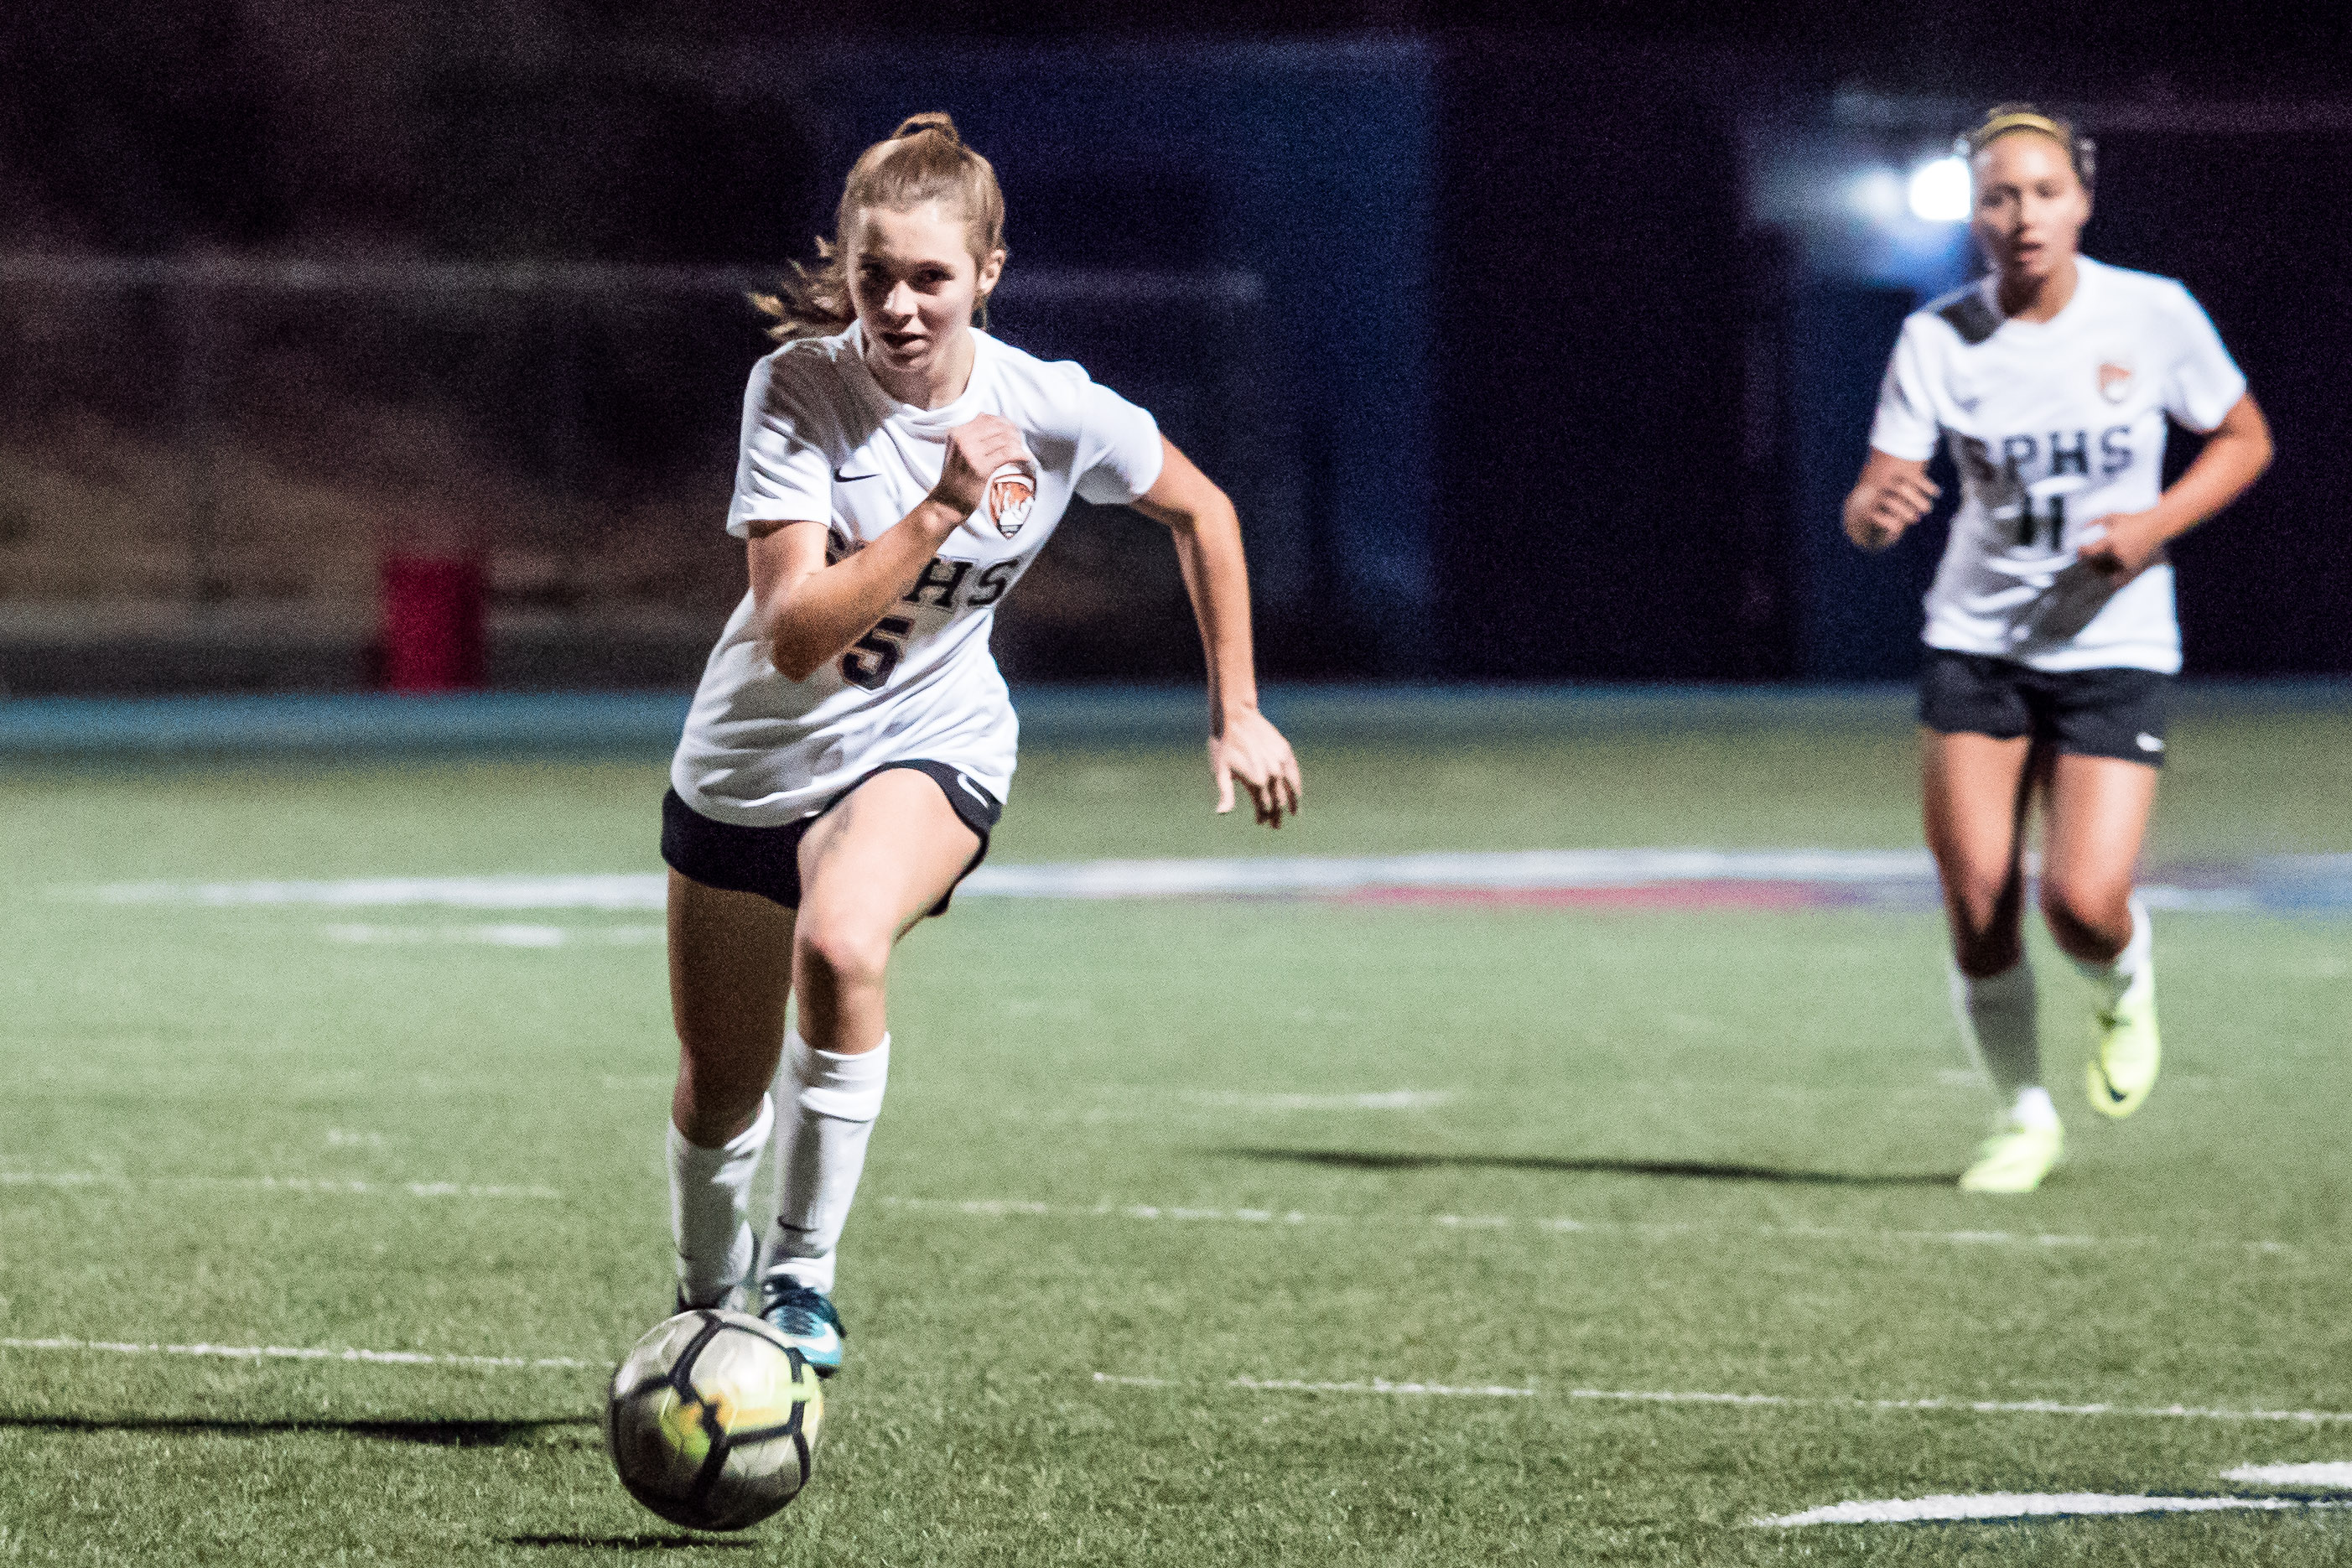 Thumbnail for Girls’ soccer pulls ahead late for preseason victory